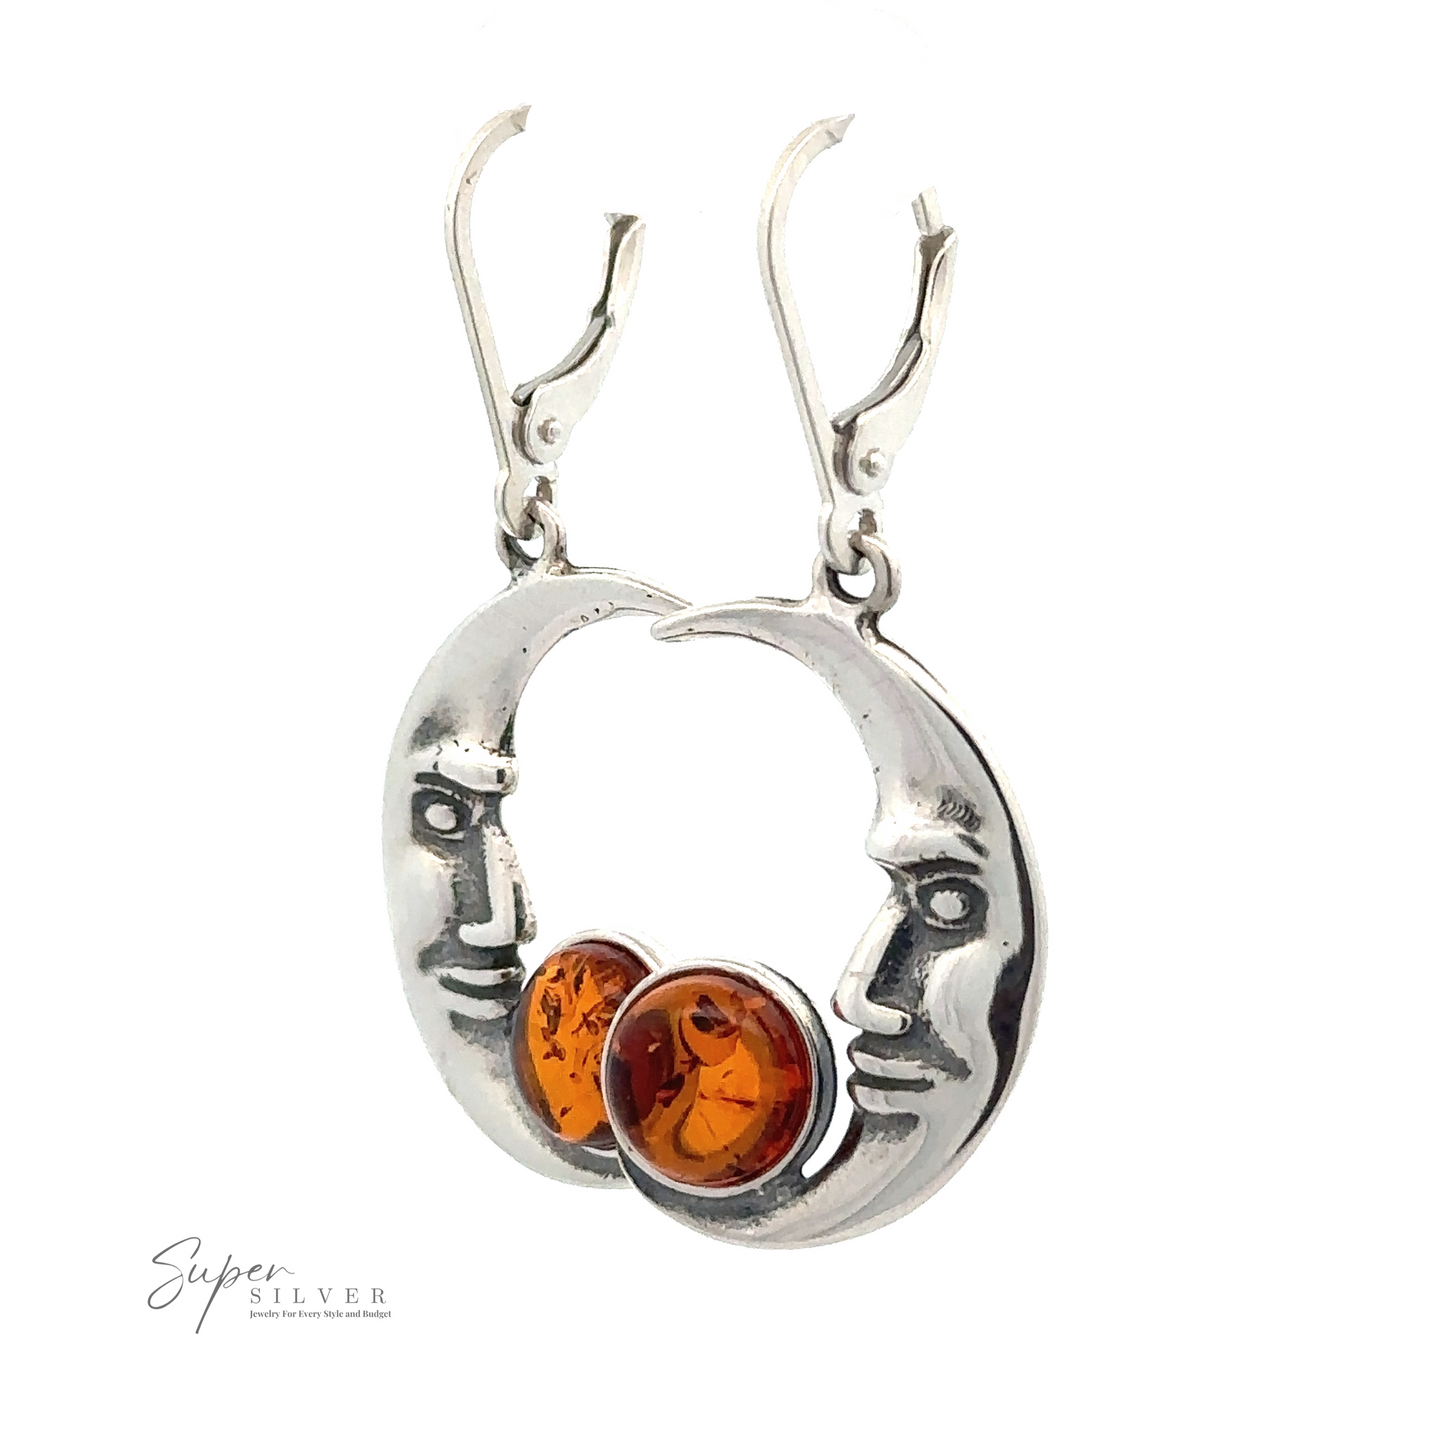 
                  
                    Amber Man-in-the-Moon Earrings with face designs, featuring round Baltic amber stones at the bottom center. The logo "Super Silver" is visible on the left side.
                  
                